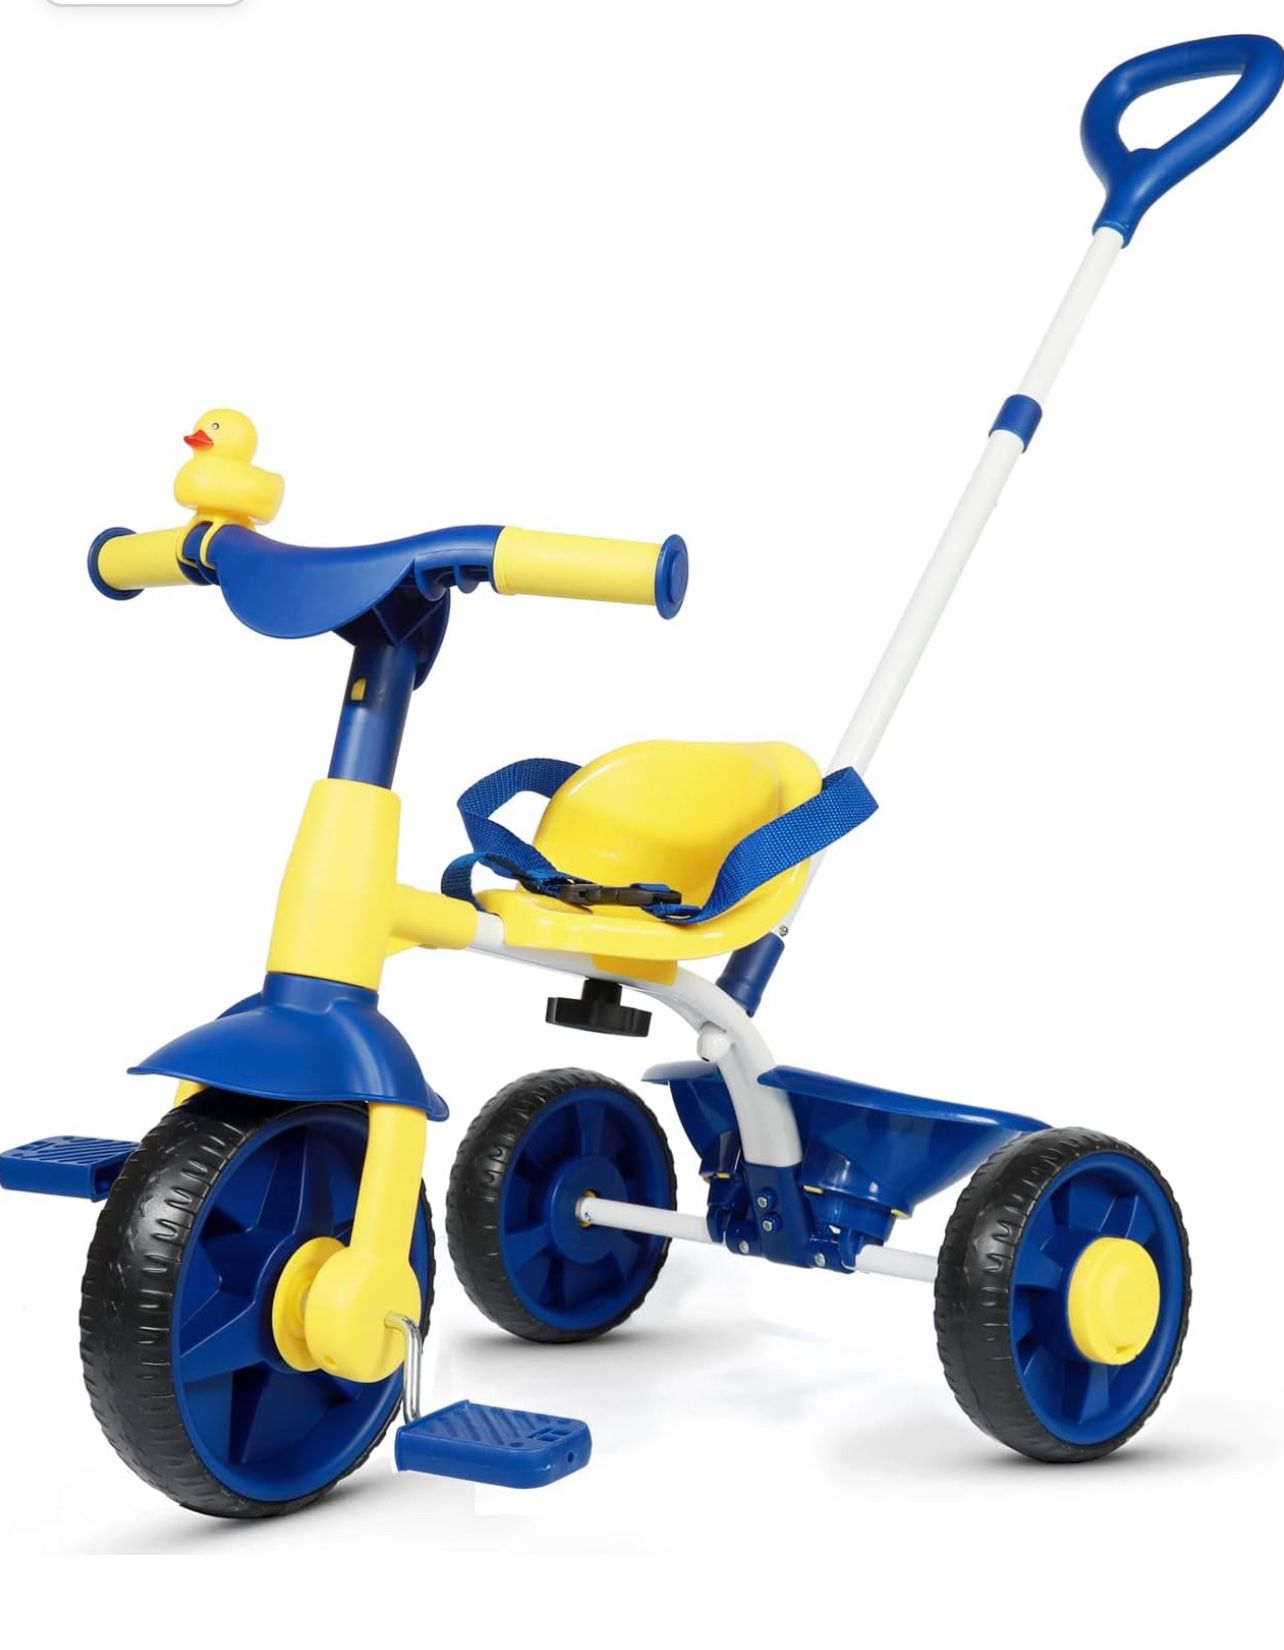 KRIDDO 2 in 1 Kids Tricycles $29.99